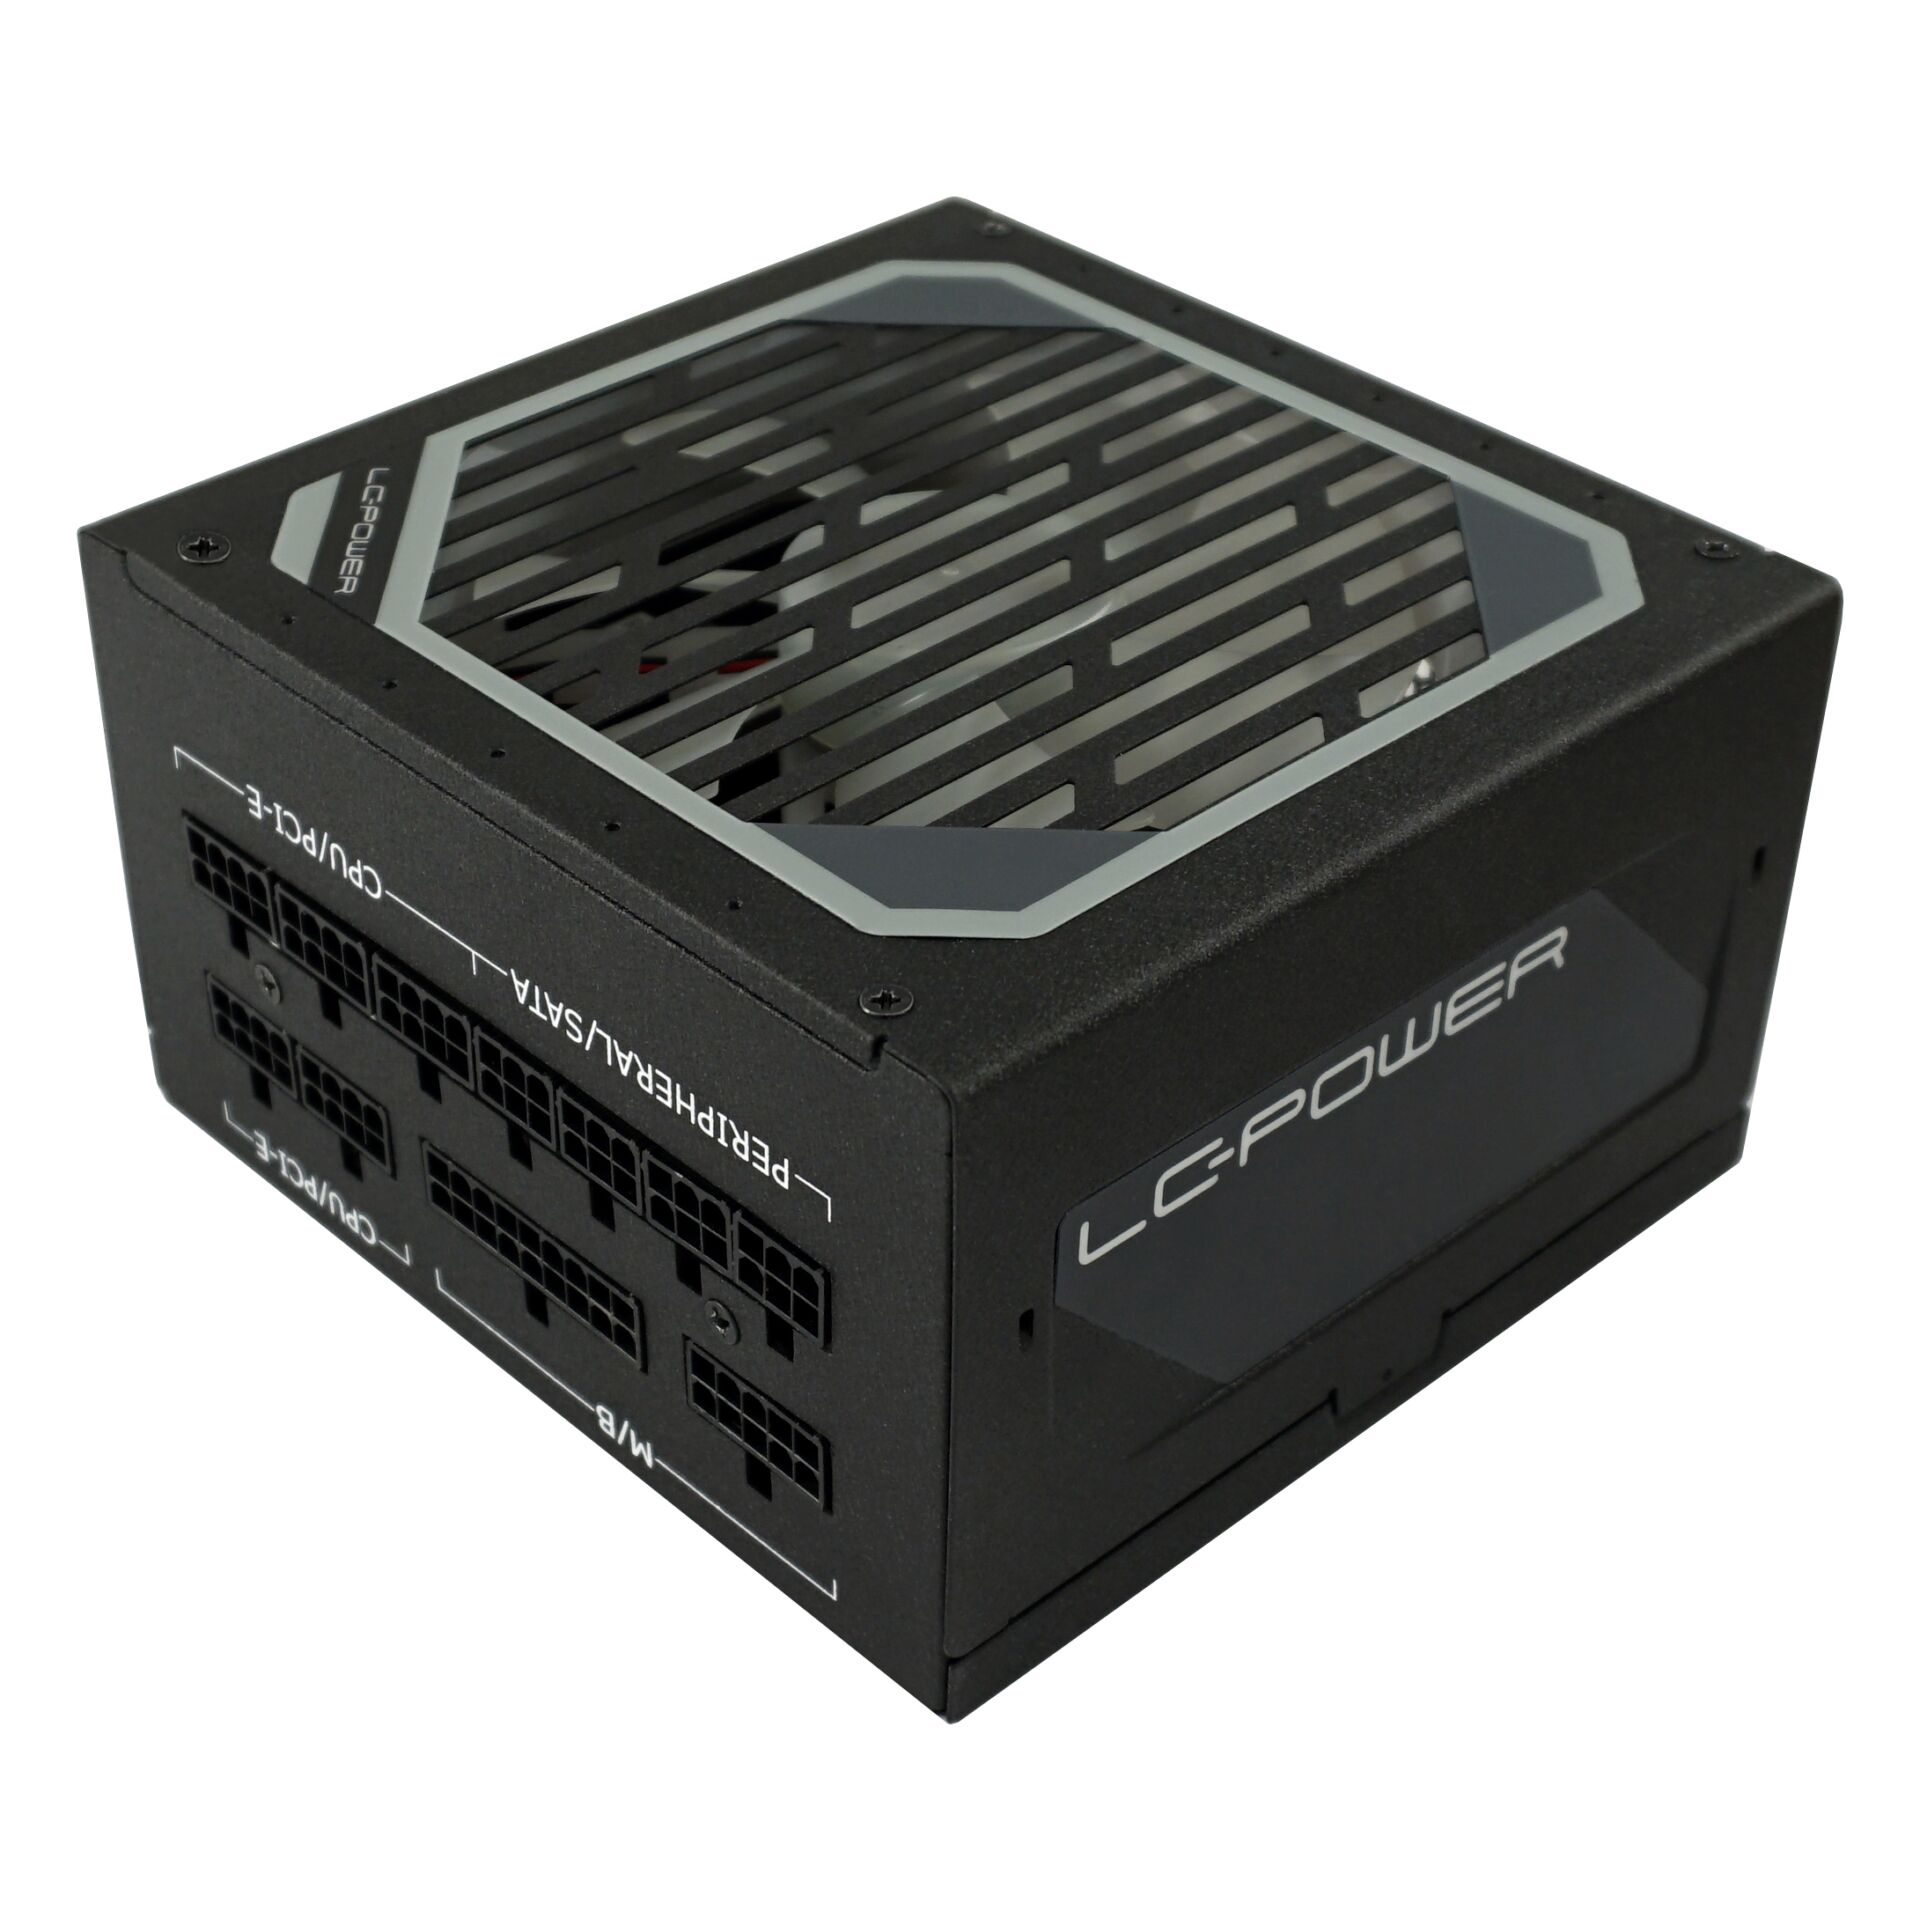 LC Power LC6850M V2.31